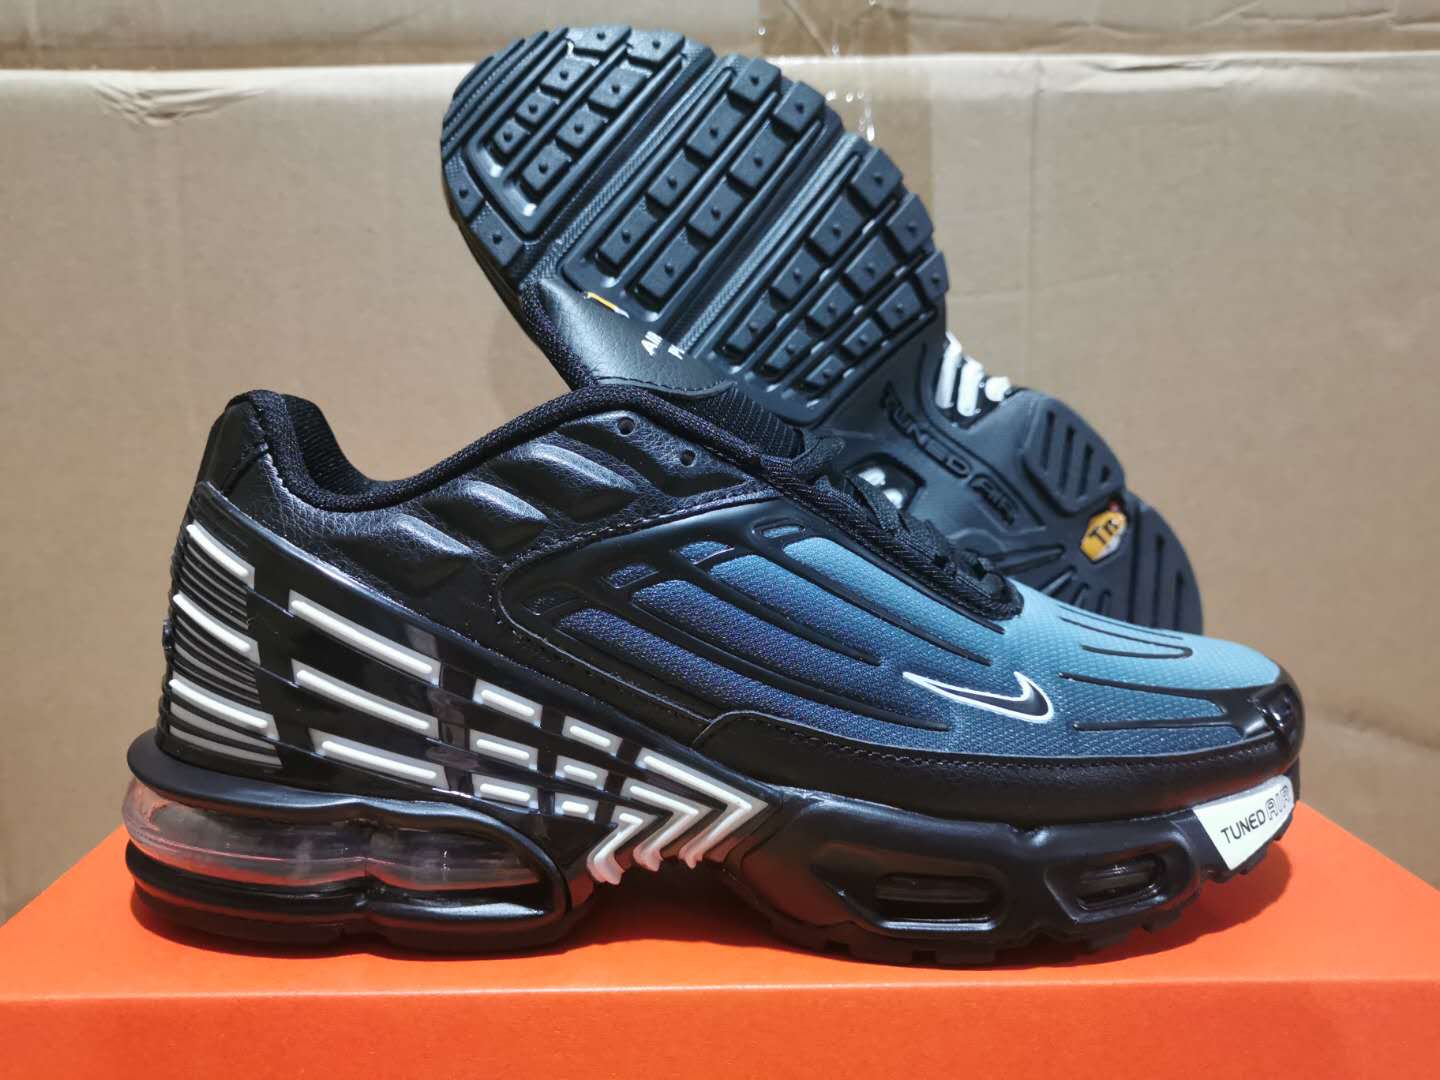 Men's Hot sale Running weapon Air Max TN Shoes 070